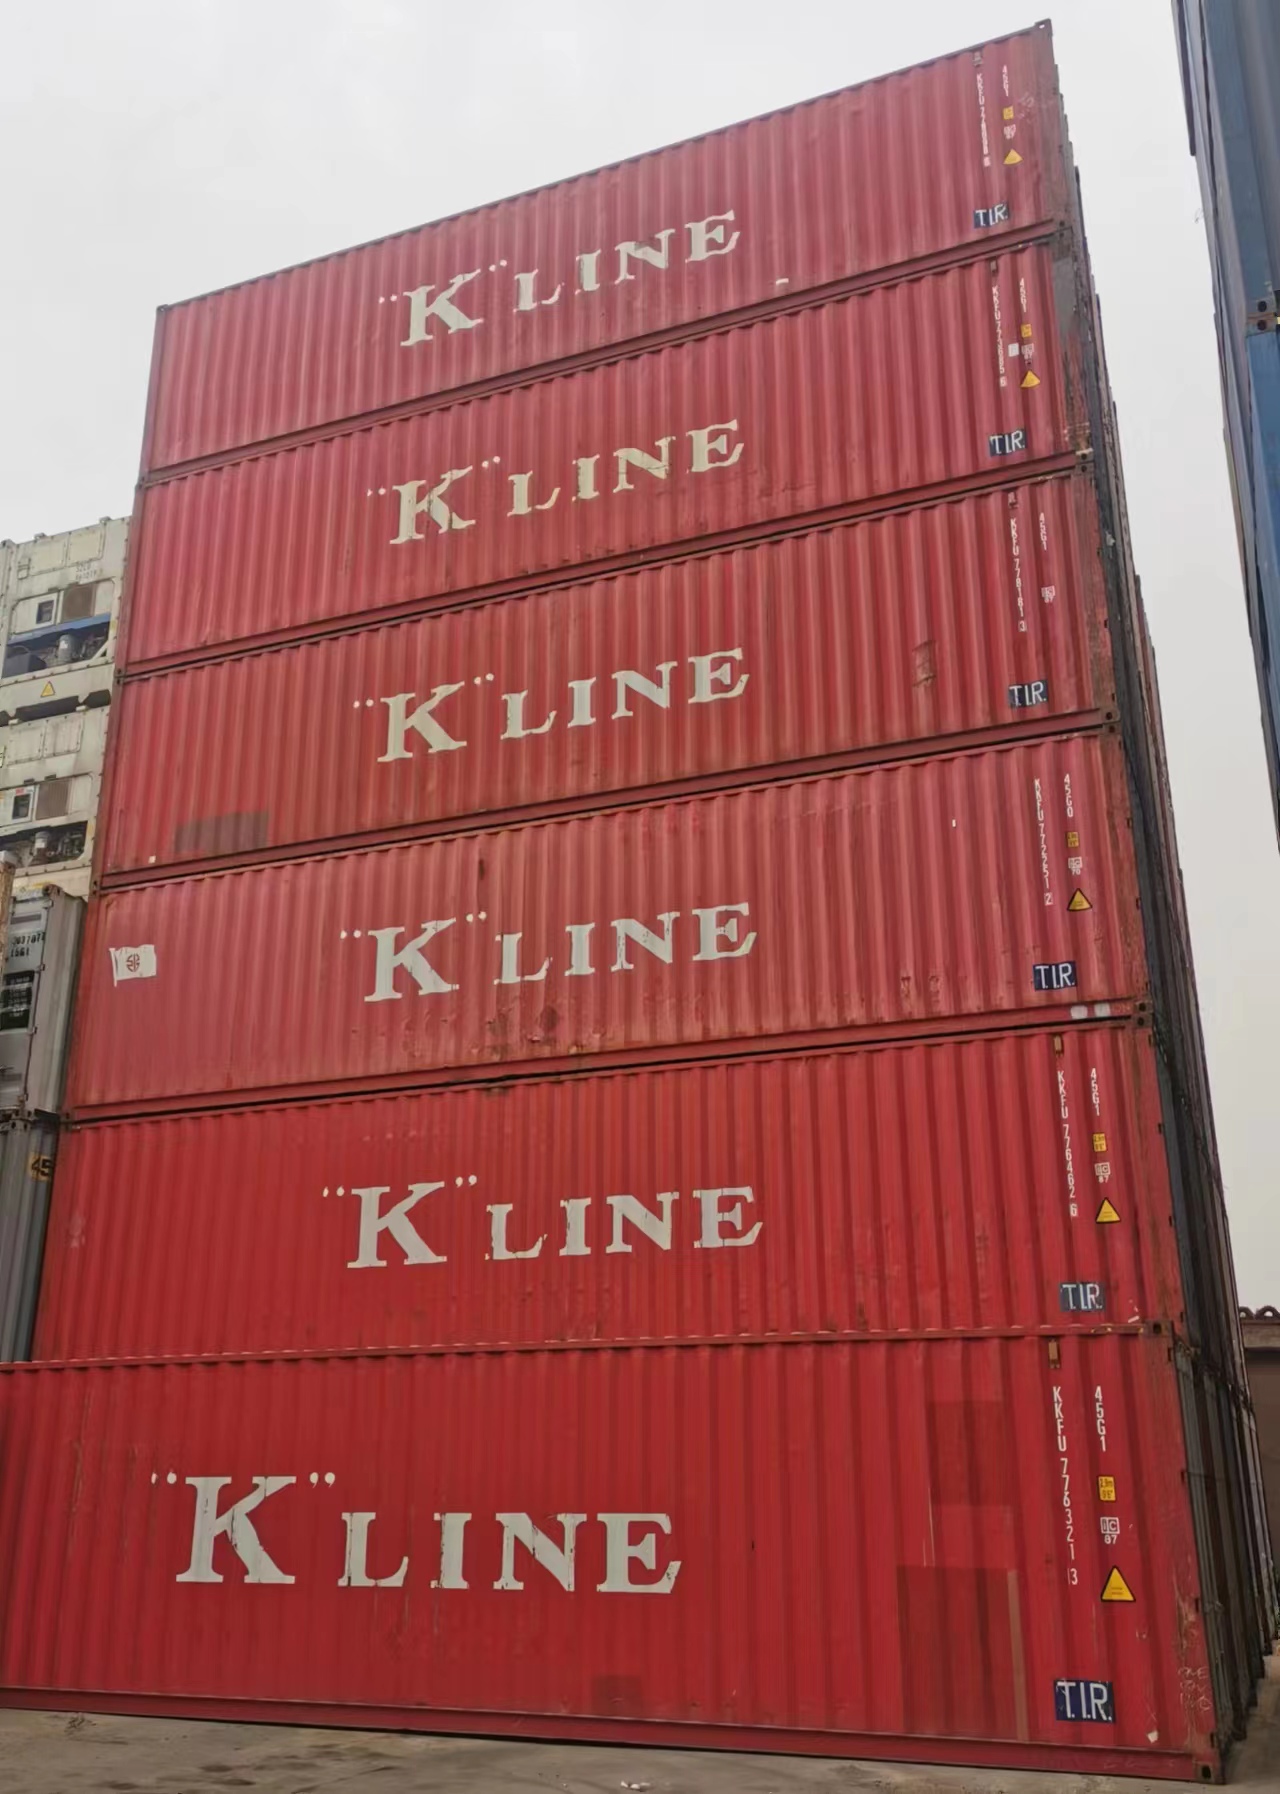 Railway container are on sales